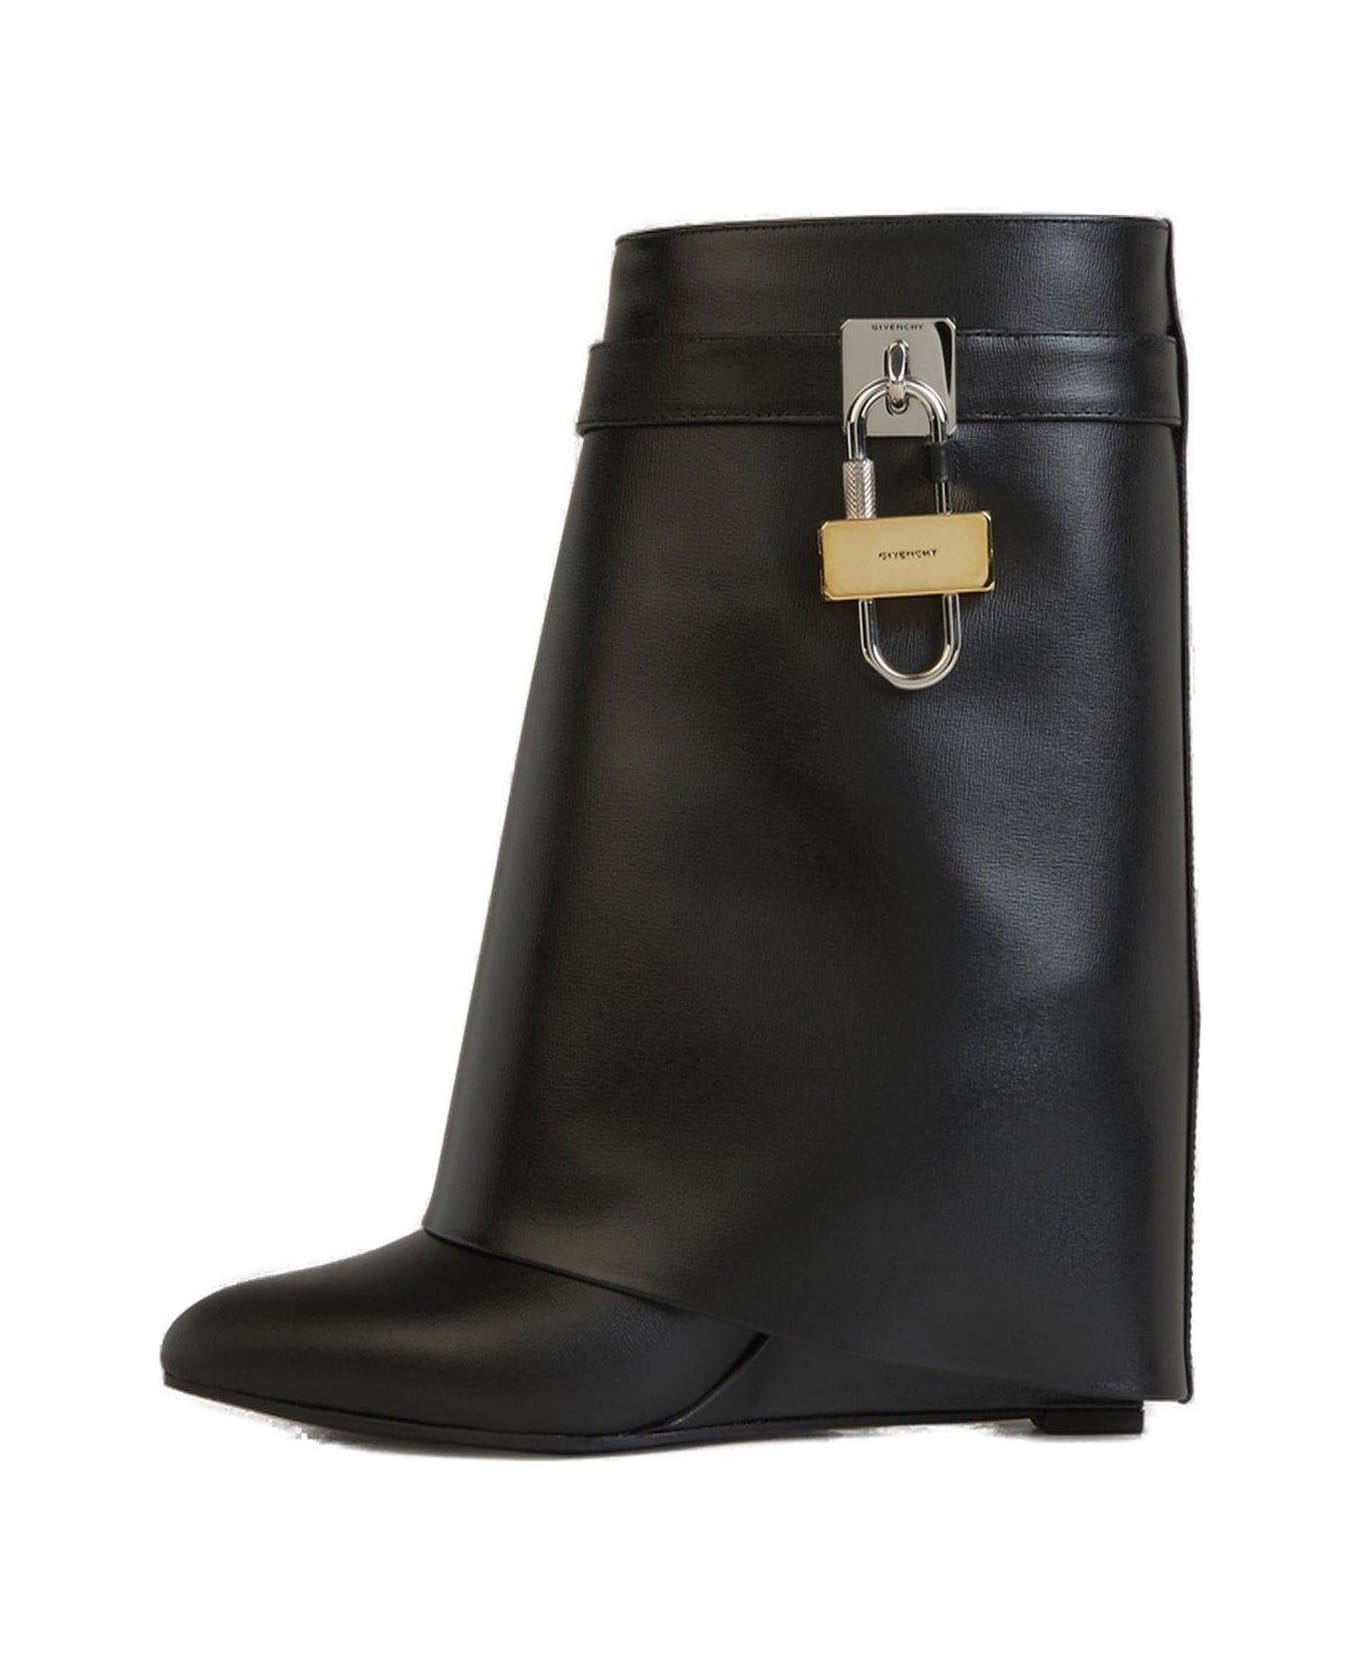 Givenchy Shark Lock Ankle Boots | italist